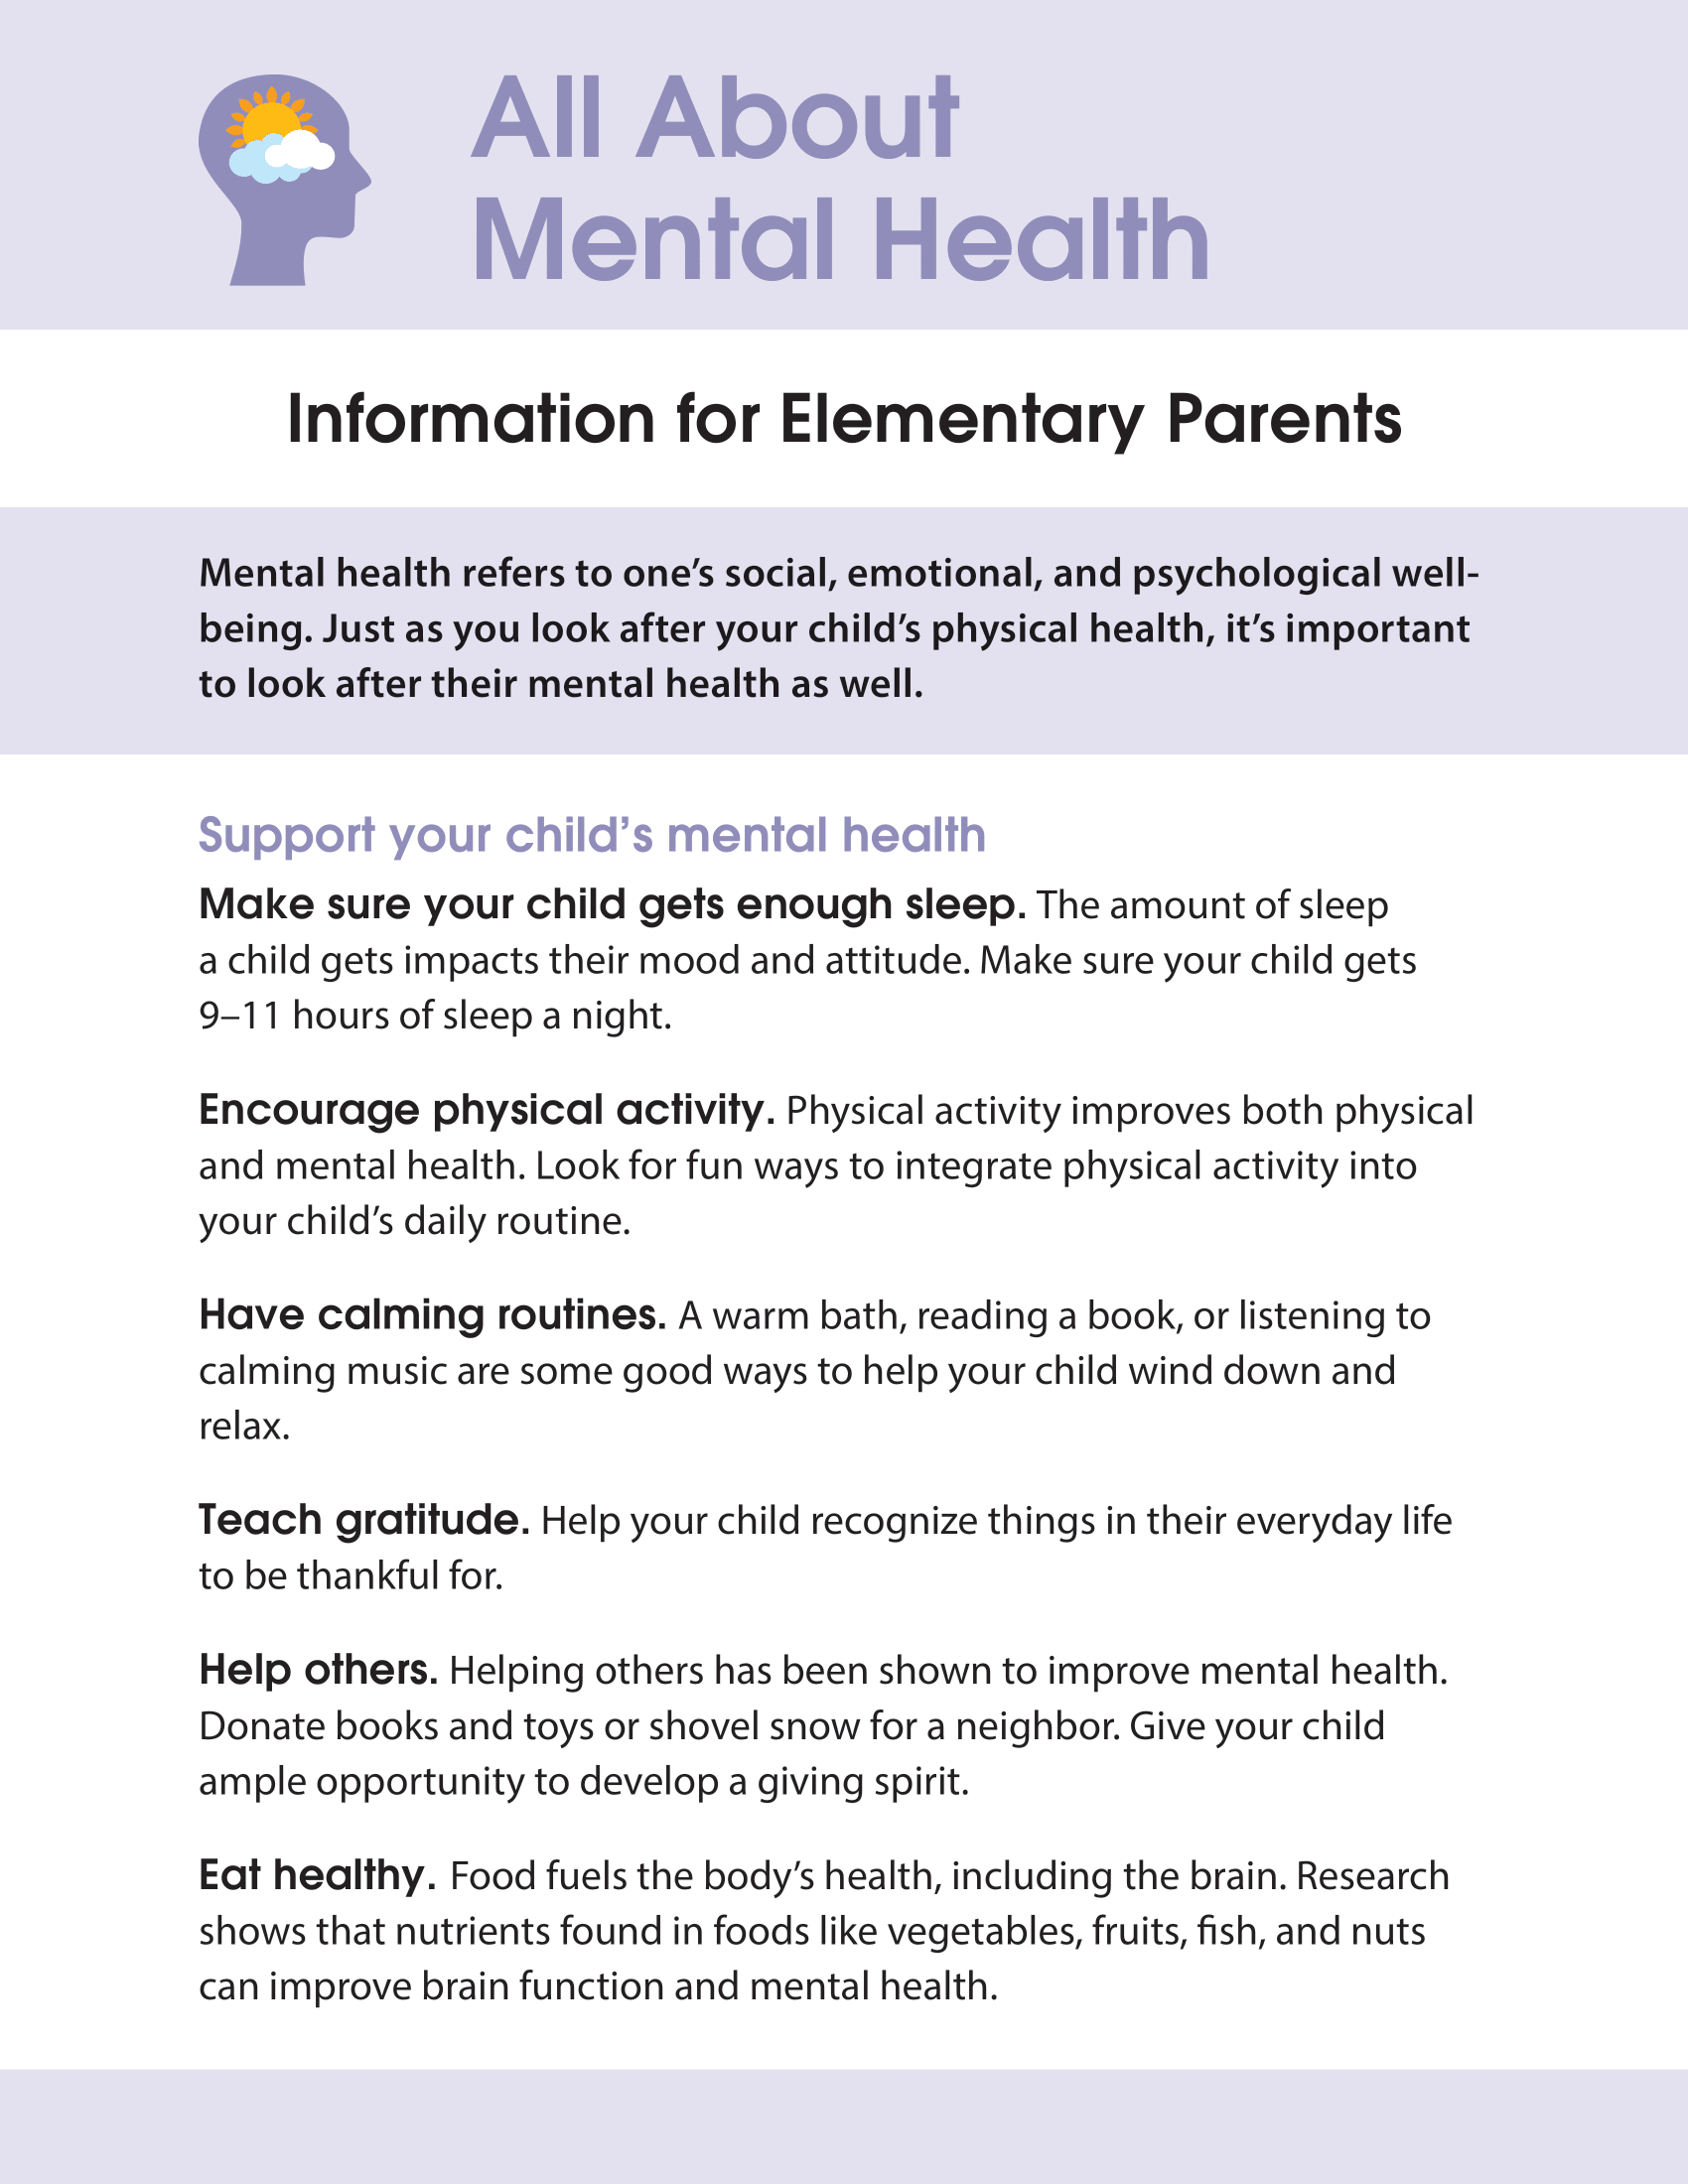 All About Mental Health - Information for Elementary Parents